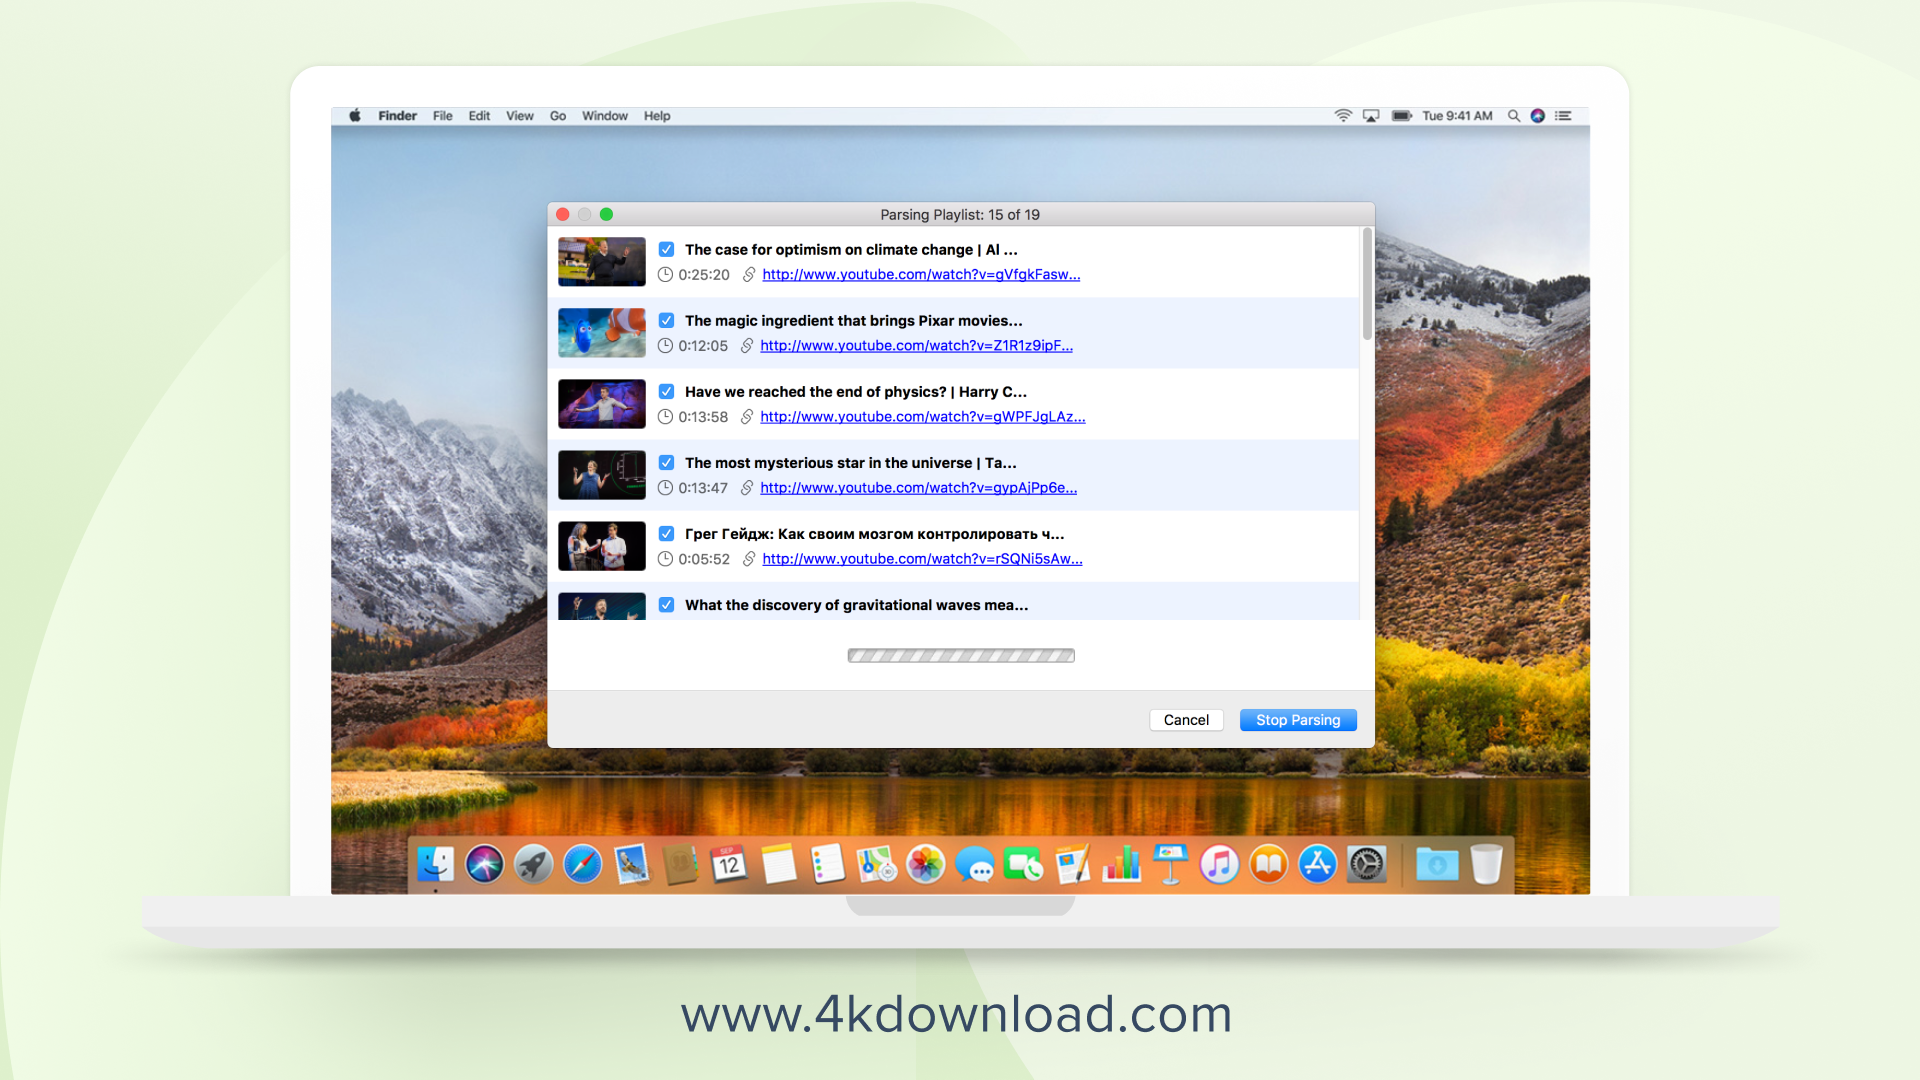 4K Video Downloader is an easy and free YouTube video downloader